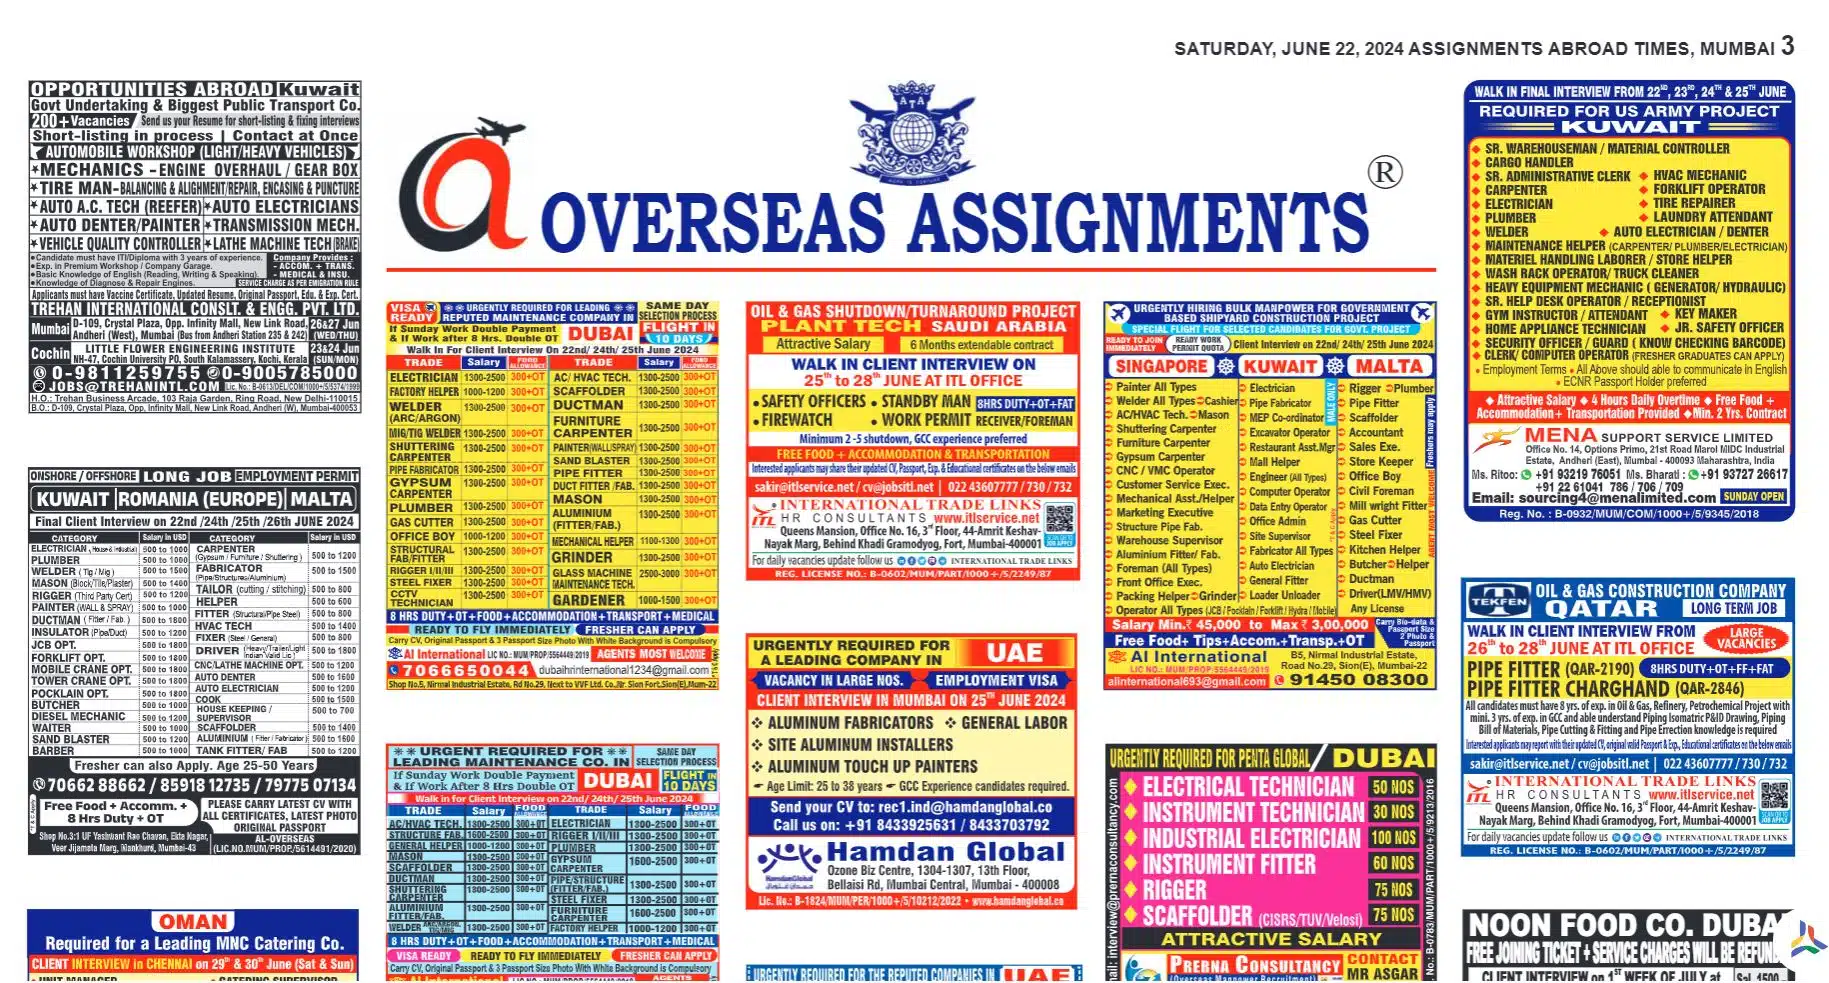 assignment abroad times e newspaper